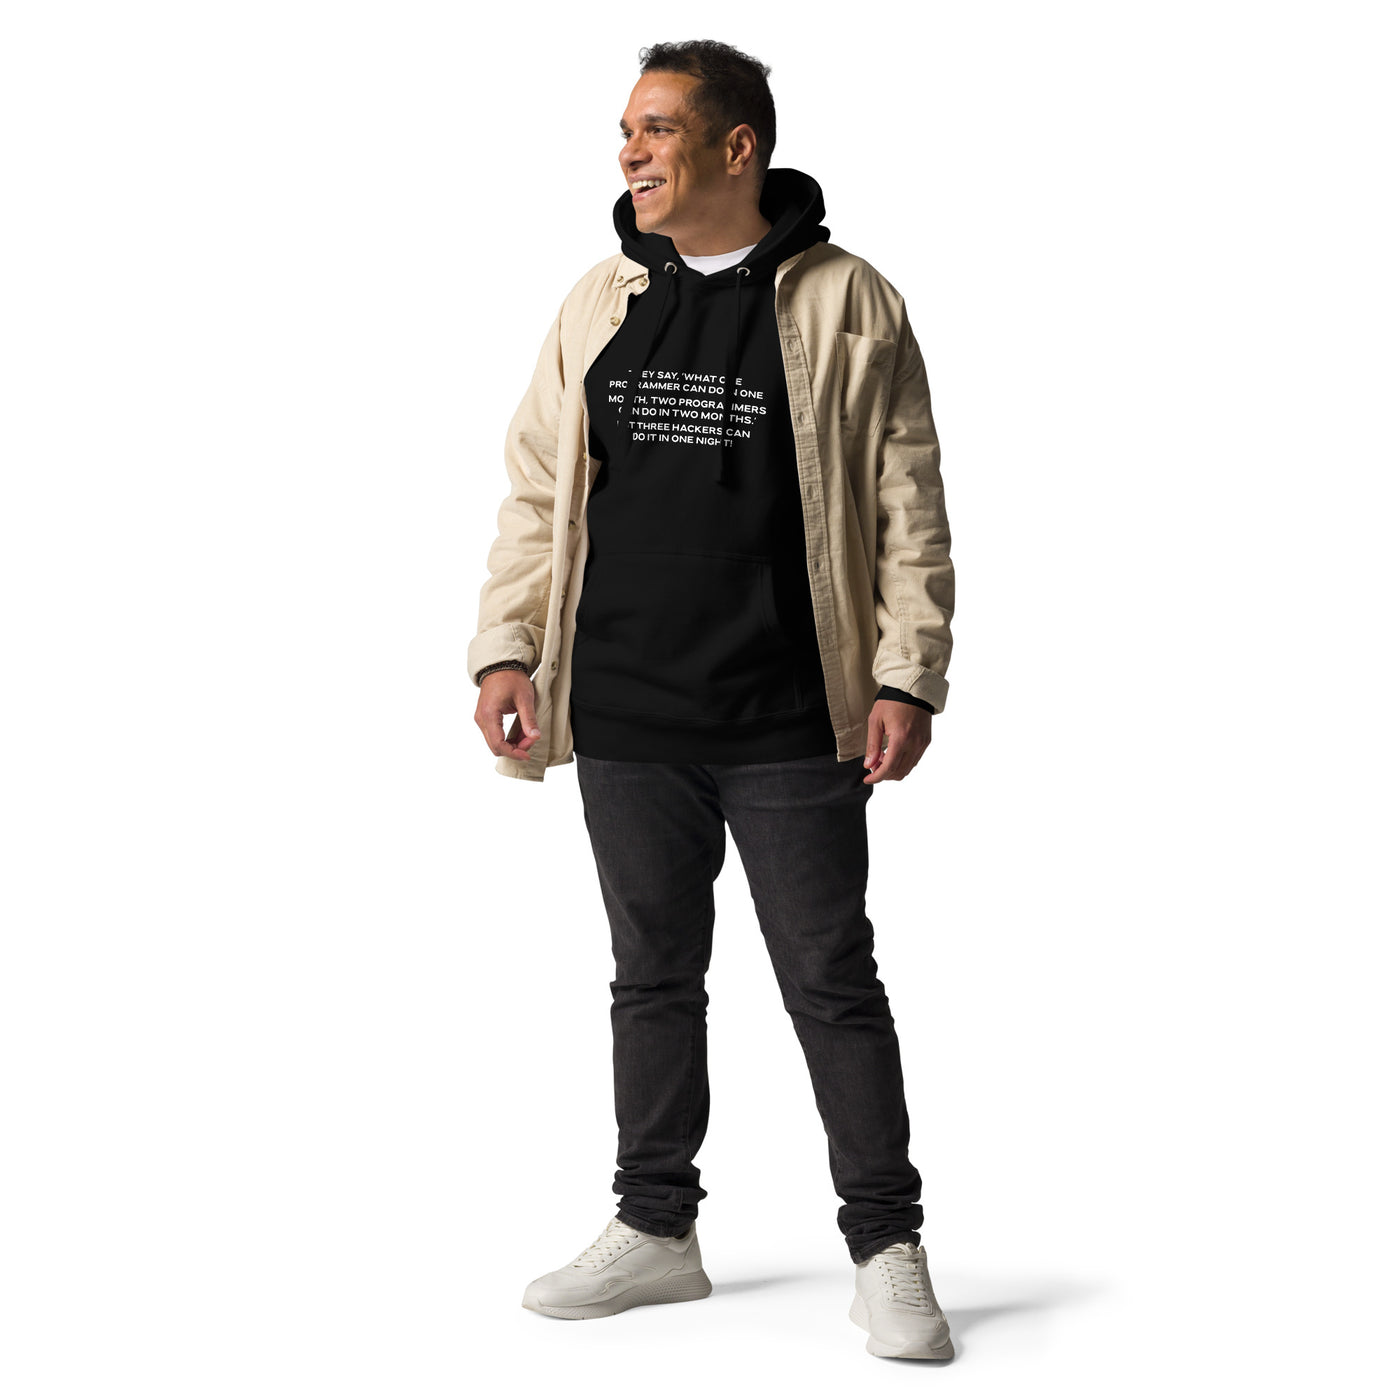 They say, what one programmer can do in one month V2 - Unisex Hoodie